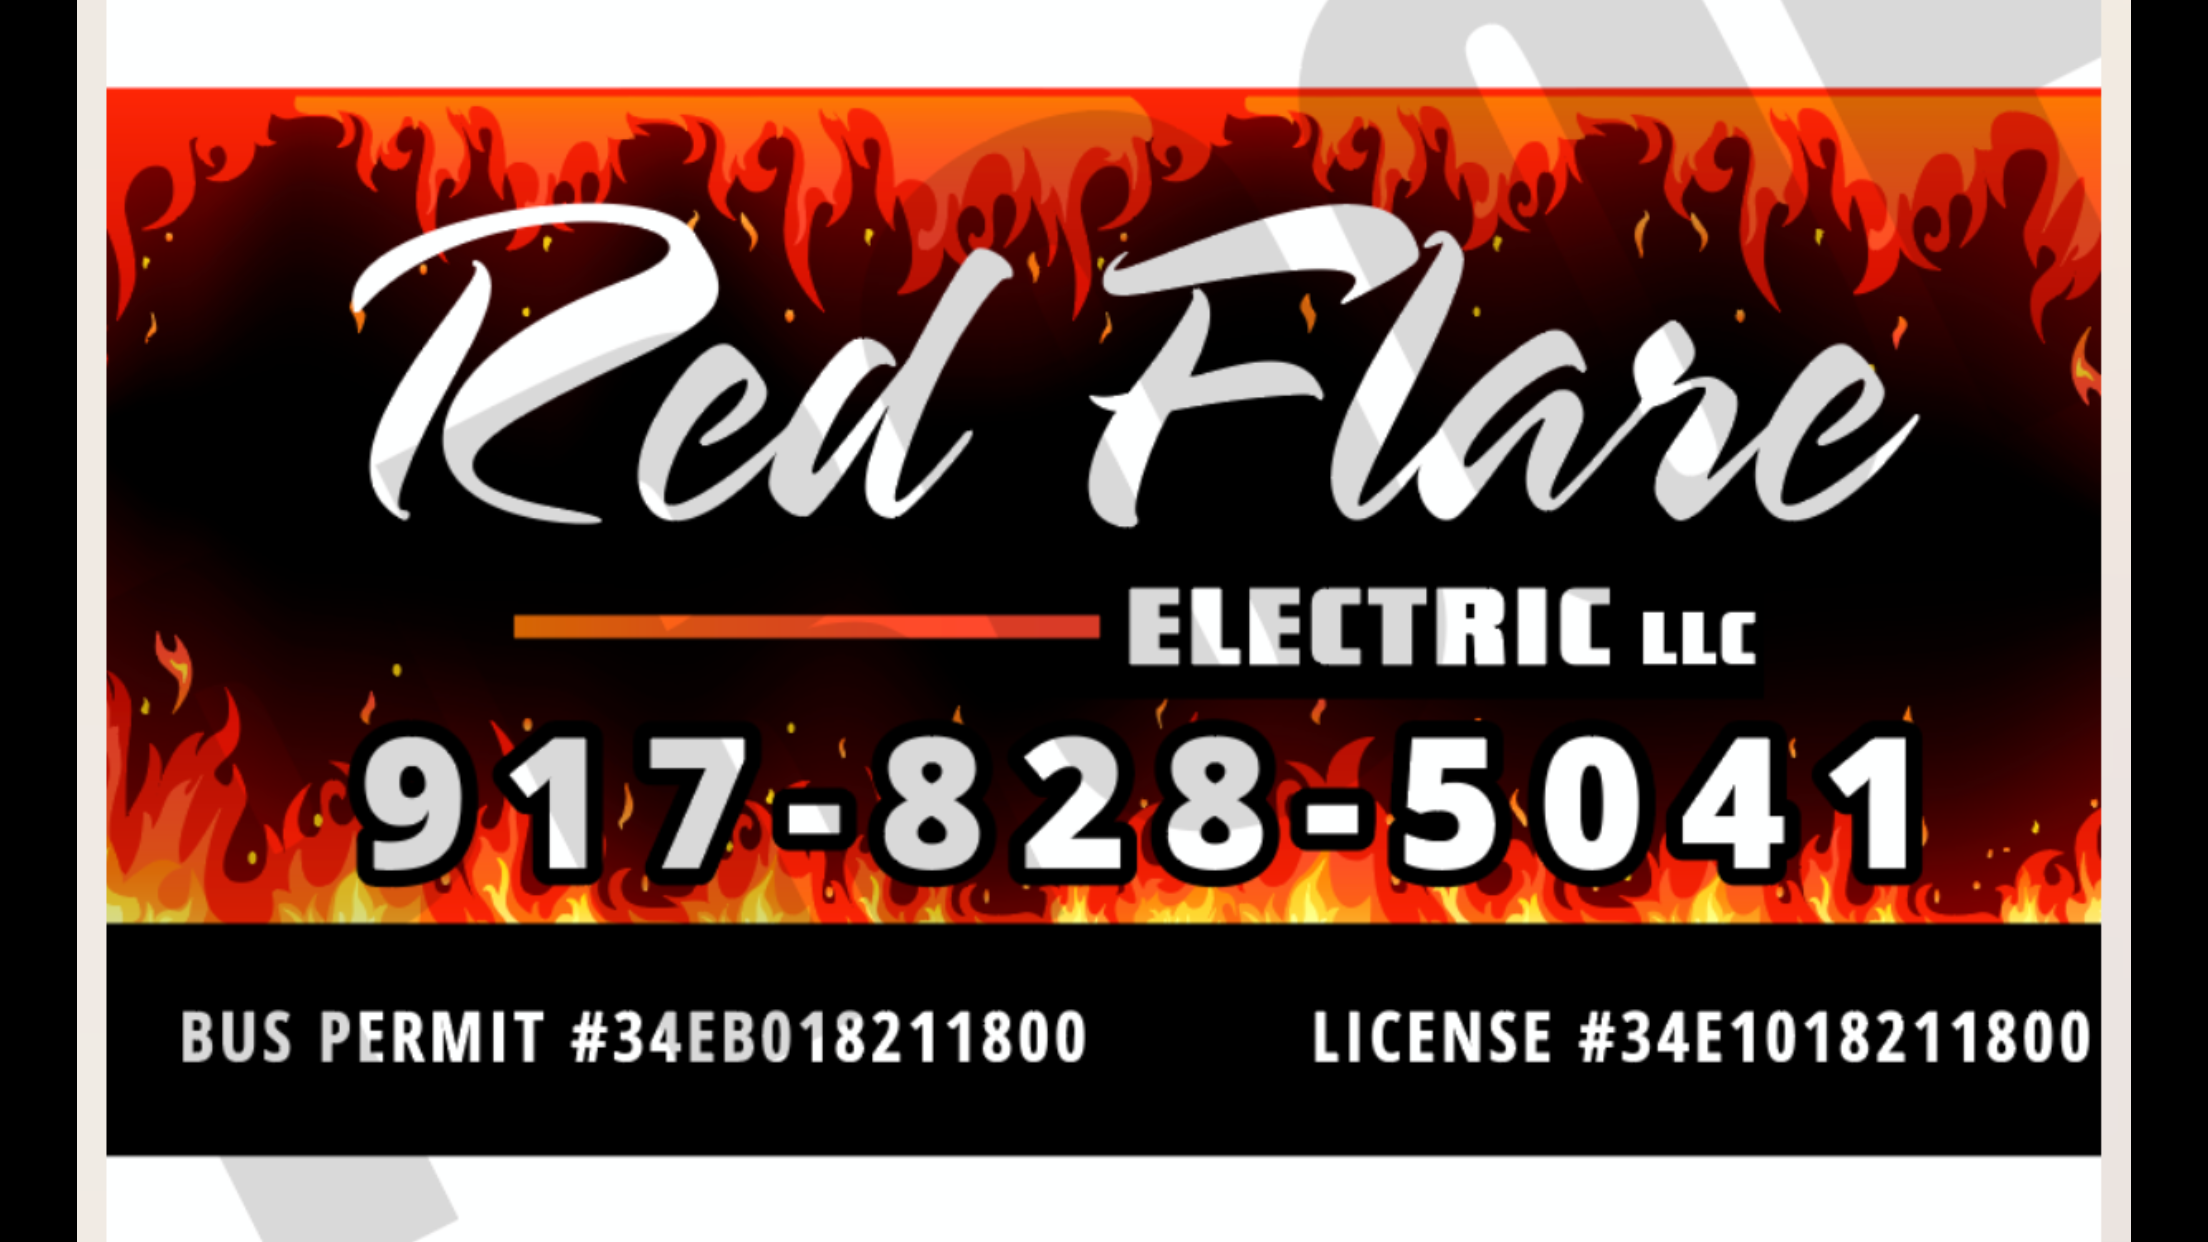 Red Flare Electric LLC,